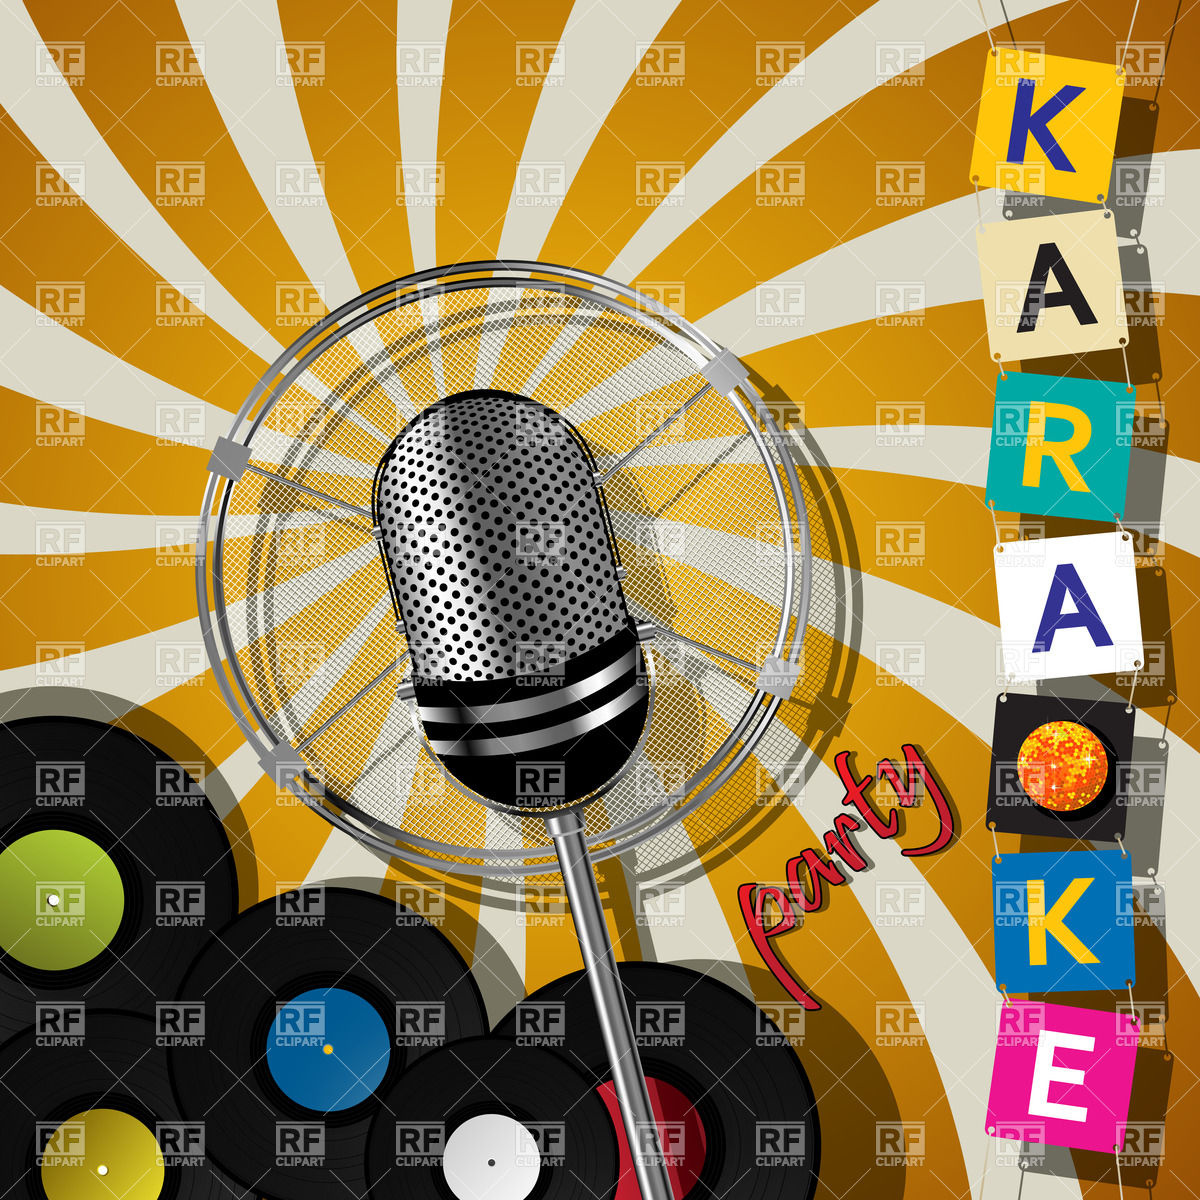 Karaoke Events 20919 Objects Download Royalty Free Vector Clipart